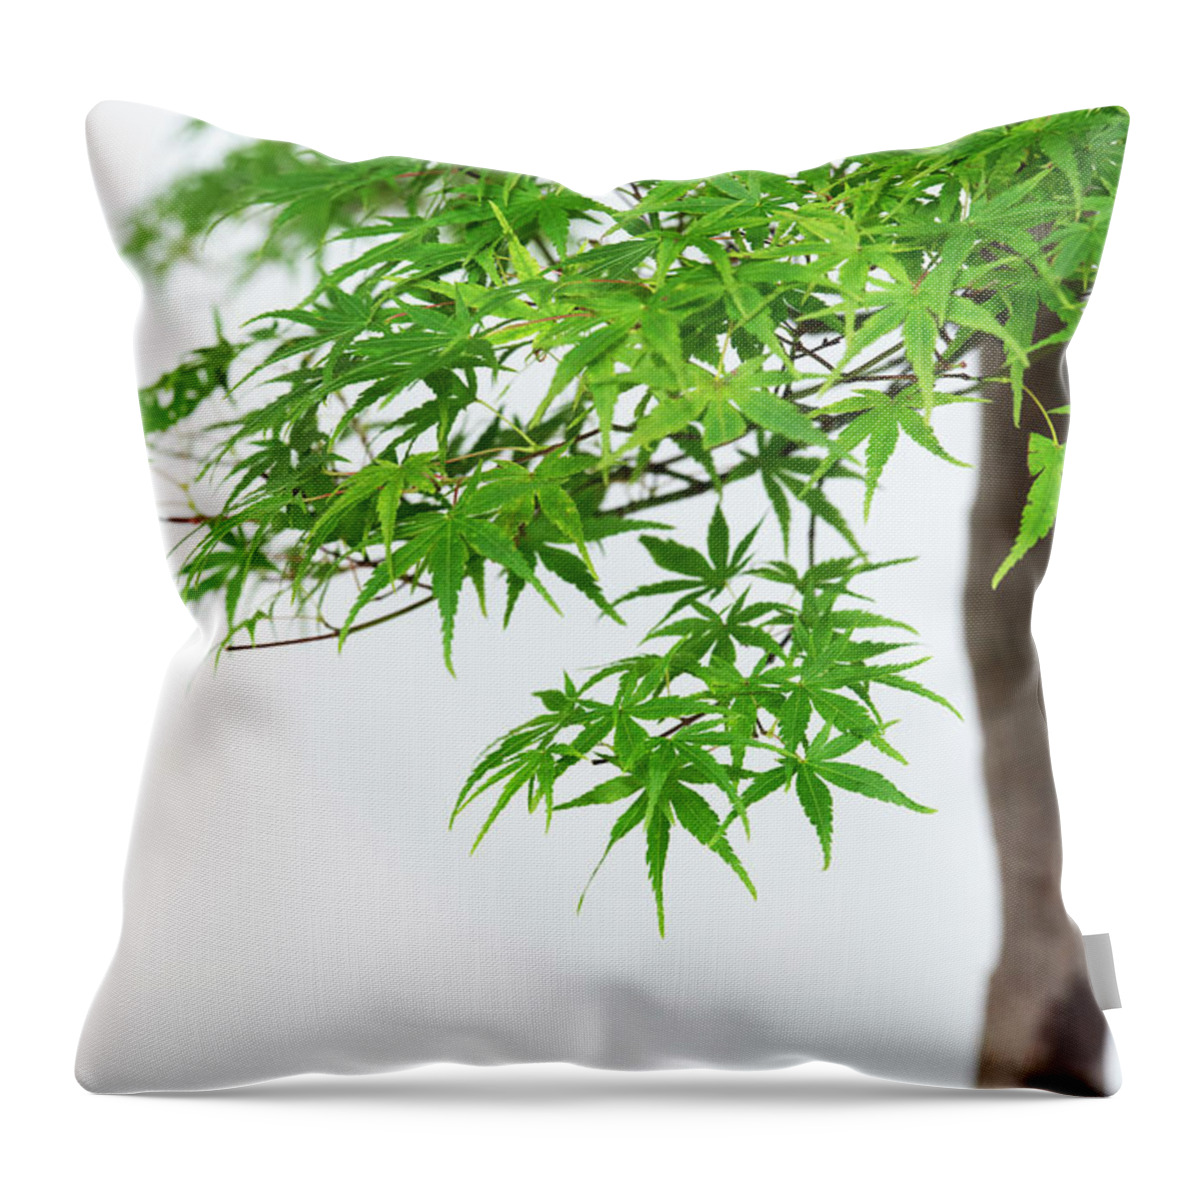 Acer Palmatum Throw Pillow featuring the photograph Bonsai Acer Tree by Tim Gainey